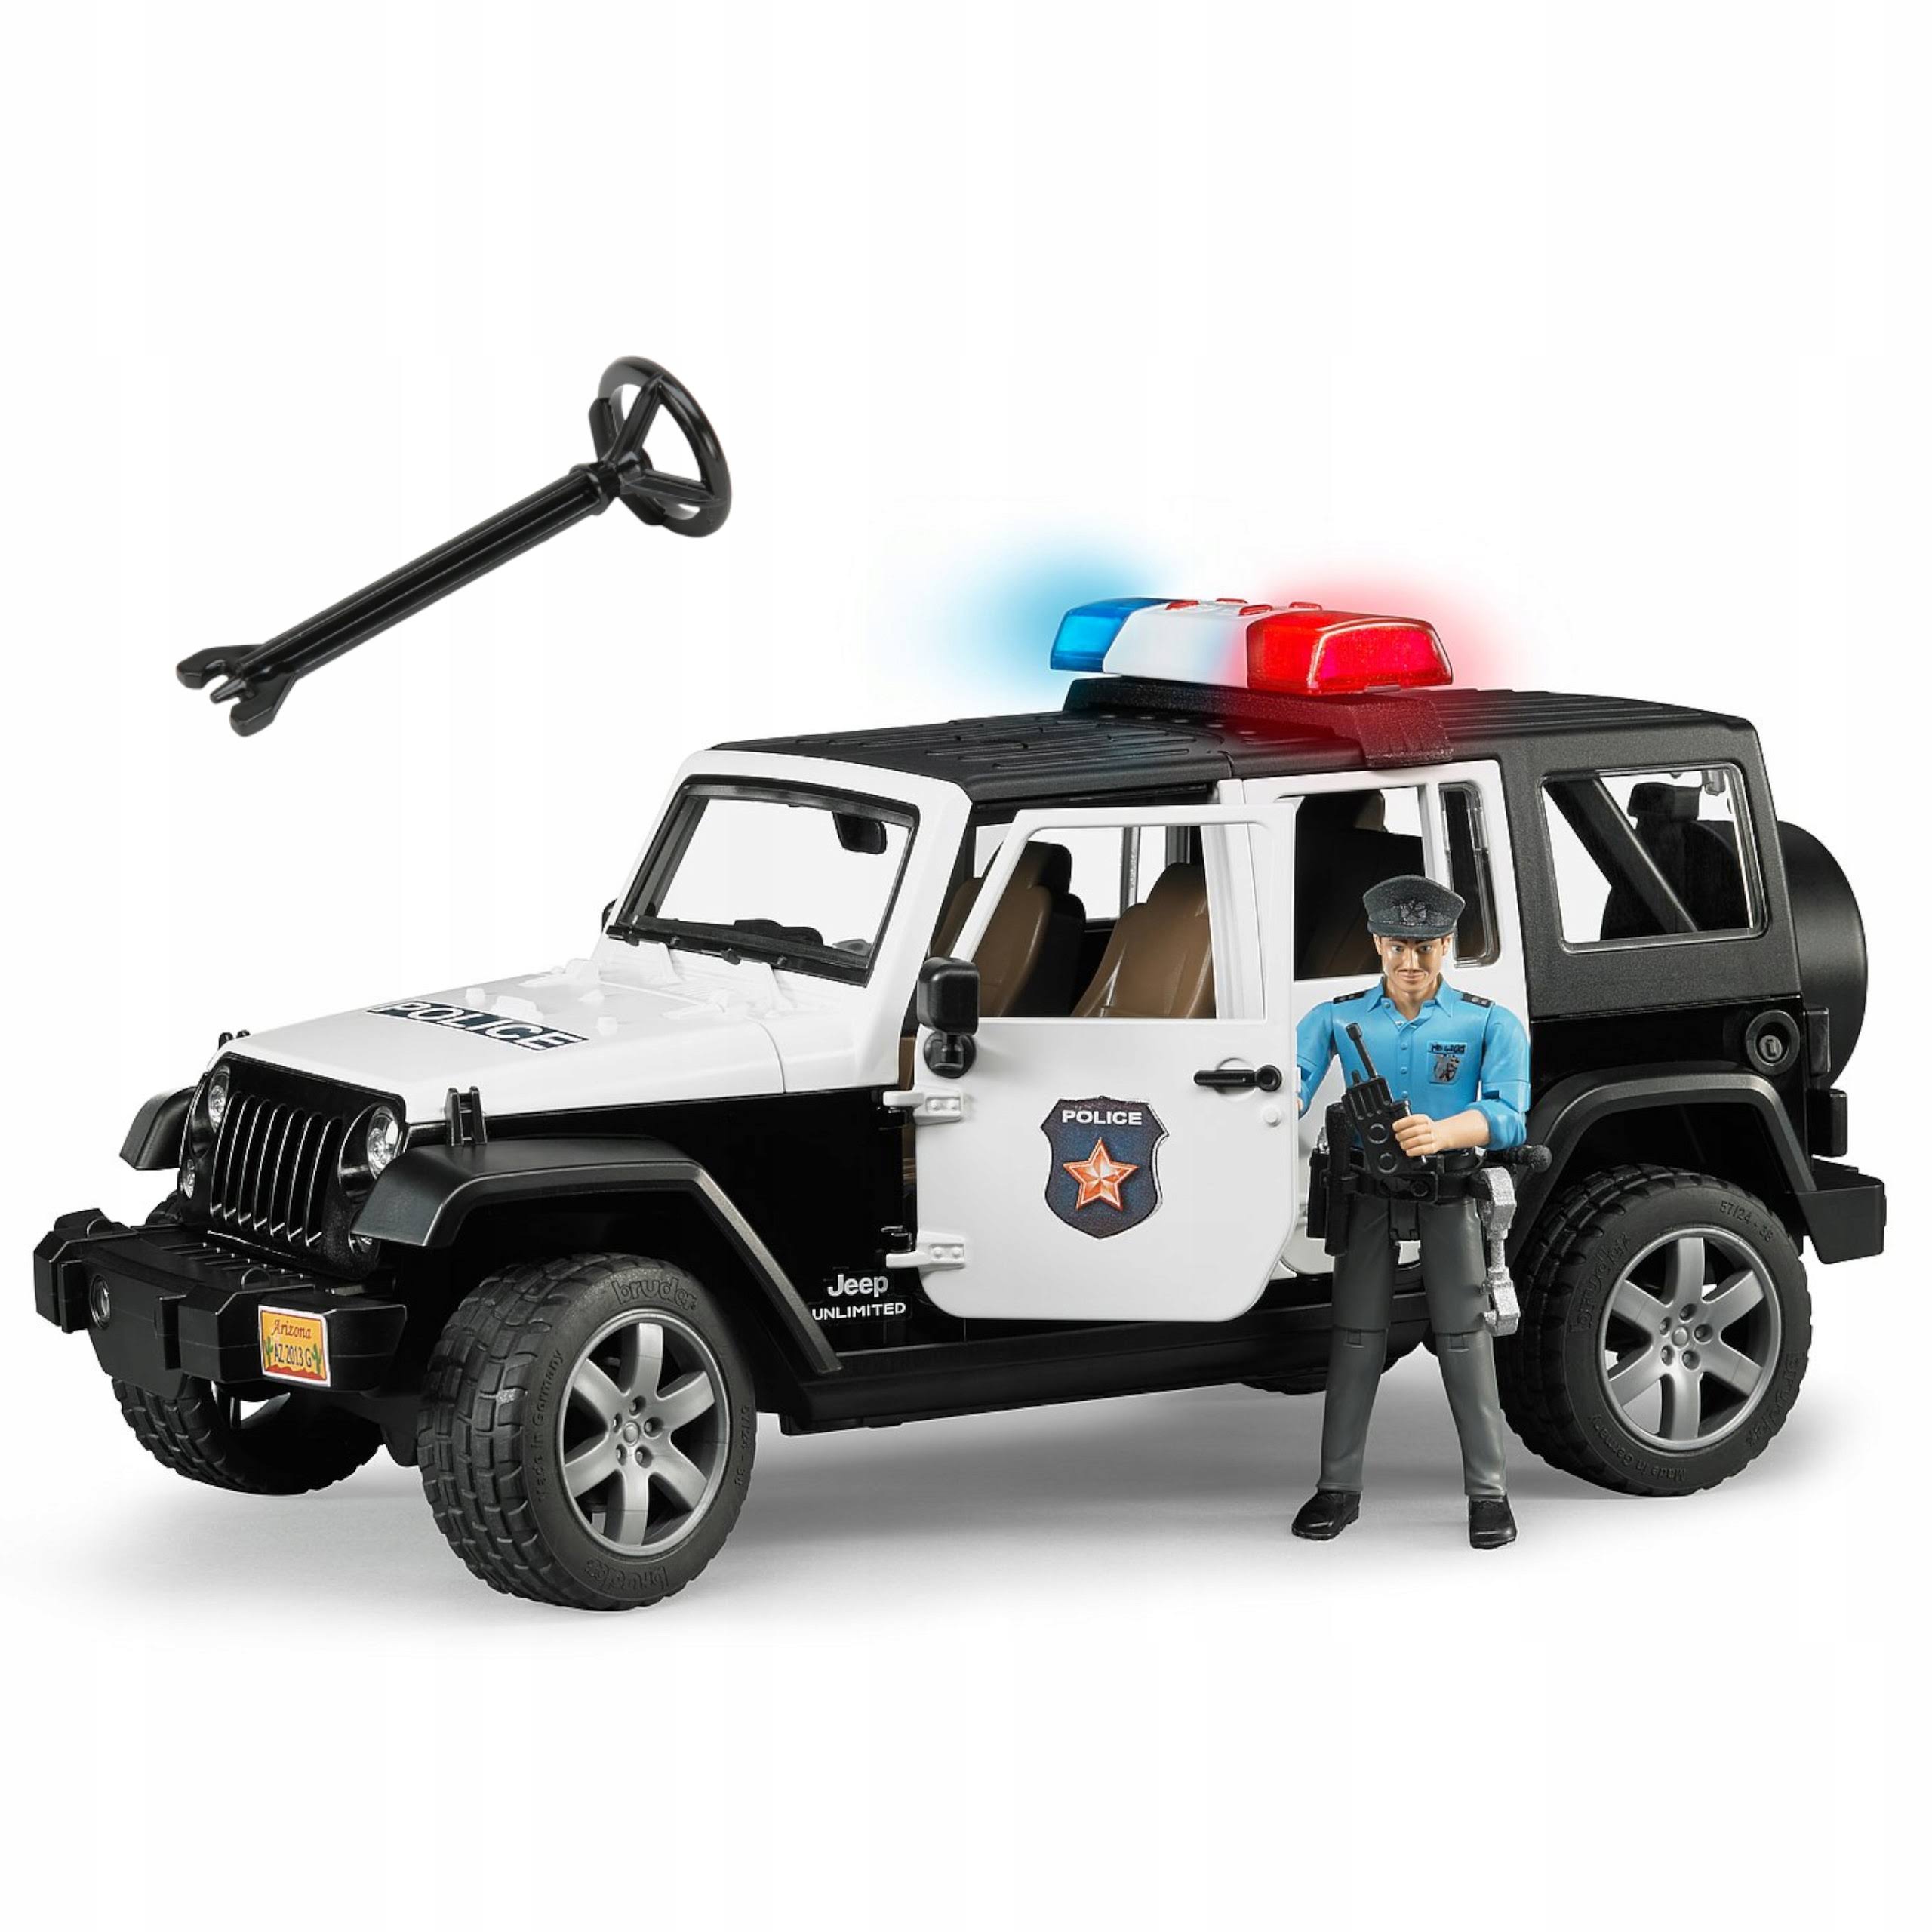 Bruder Jeep Rubicon Police Car Toy - With Policeman, 1:16 Scale